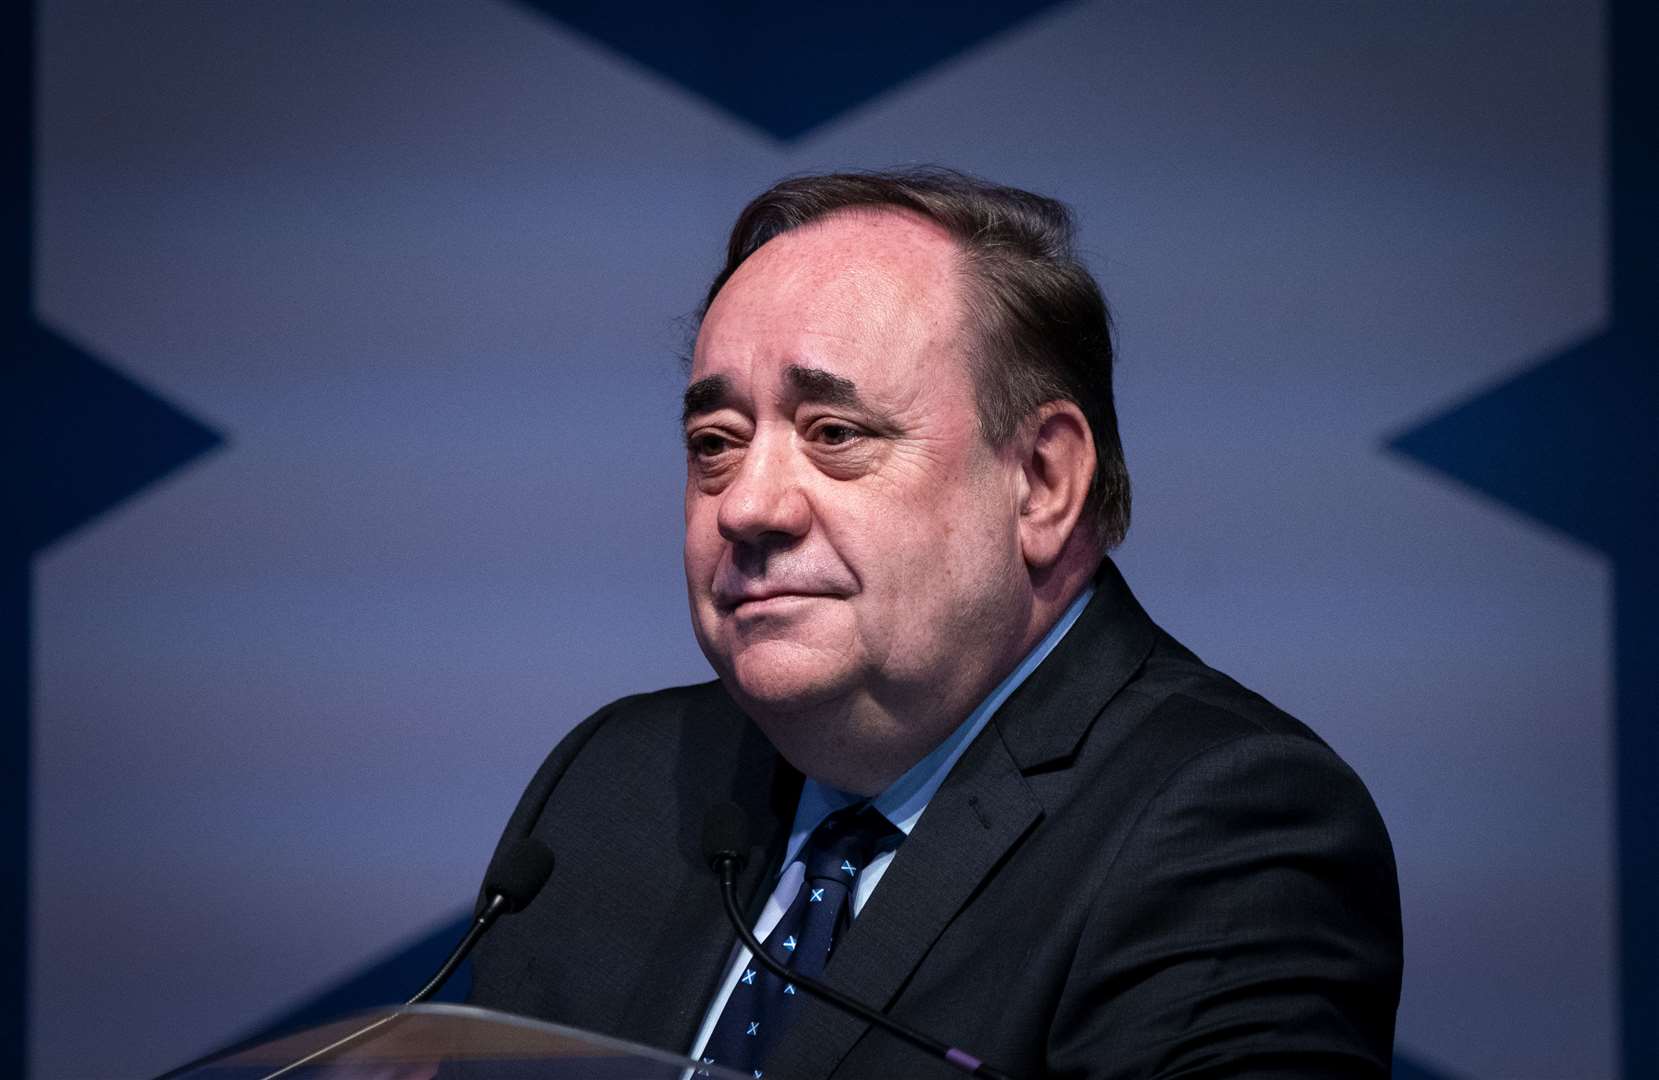 Alex Salmond appeared before the Scottish Affairs Committee on Tuesday (Jane Barlow/PA)